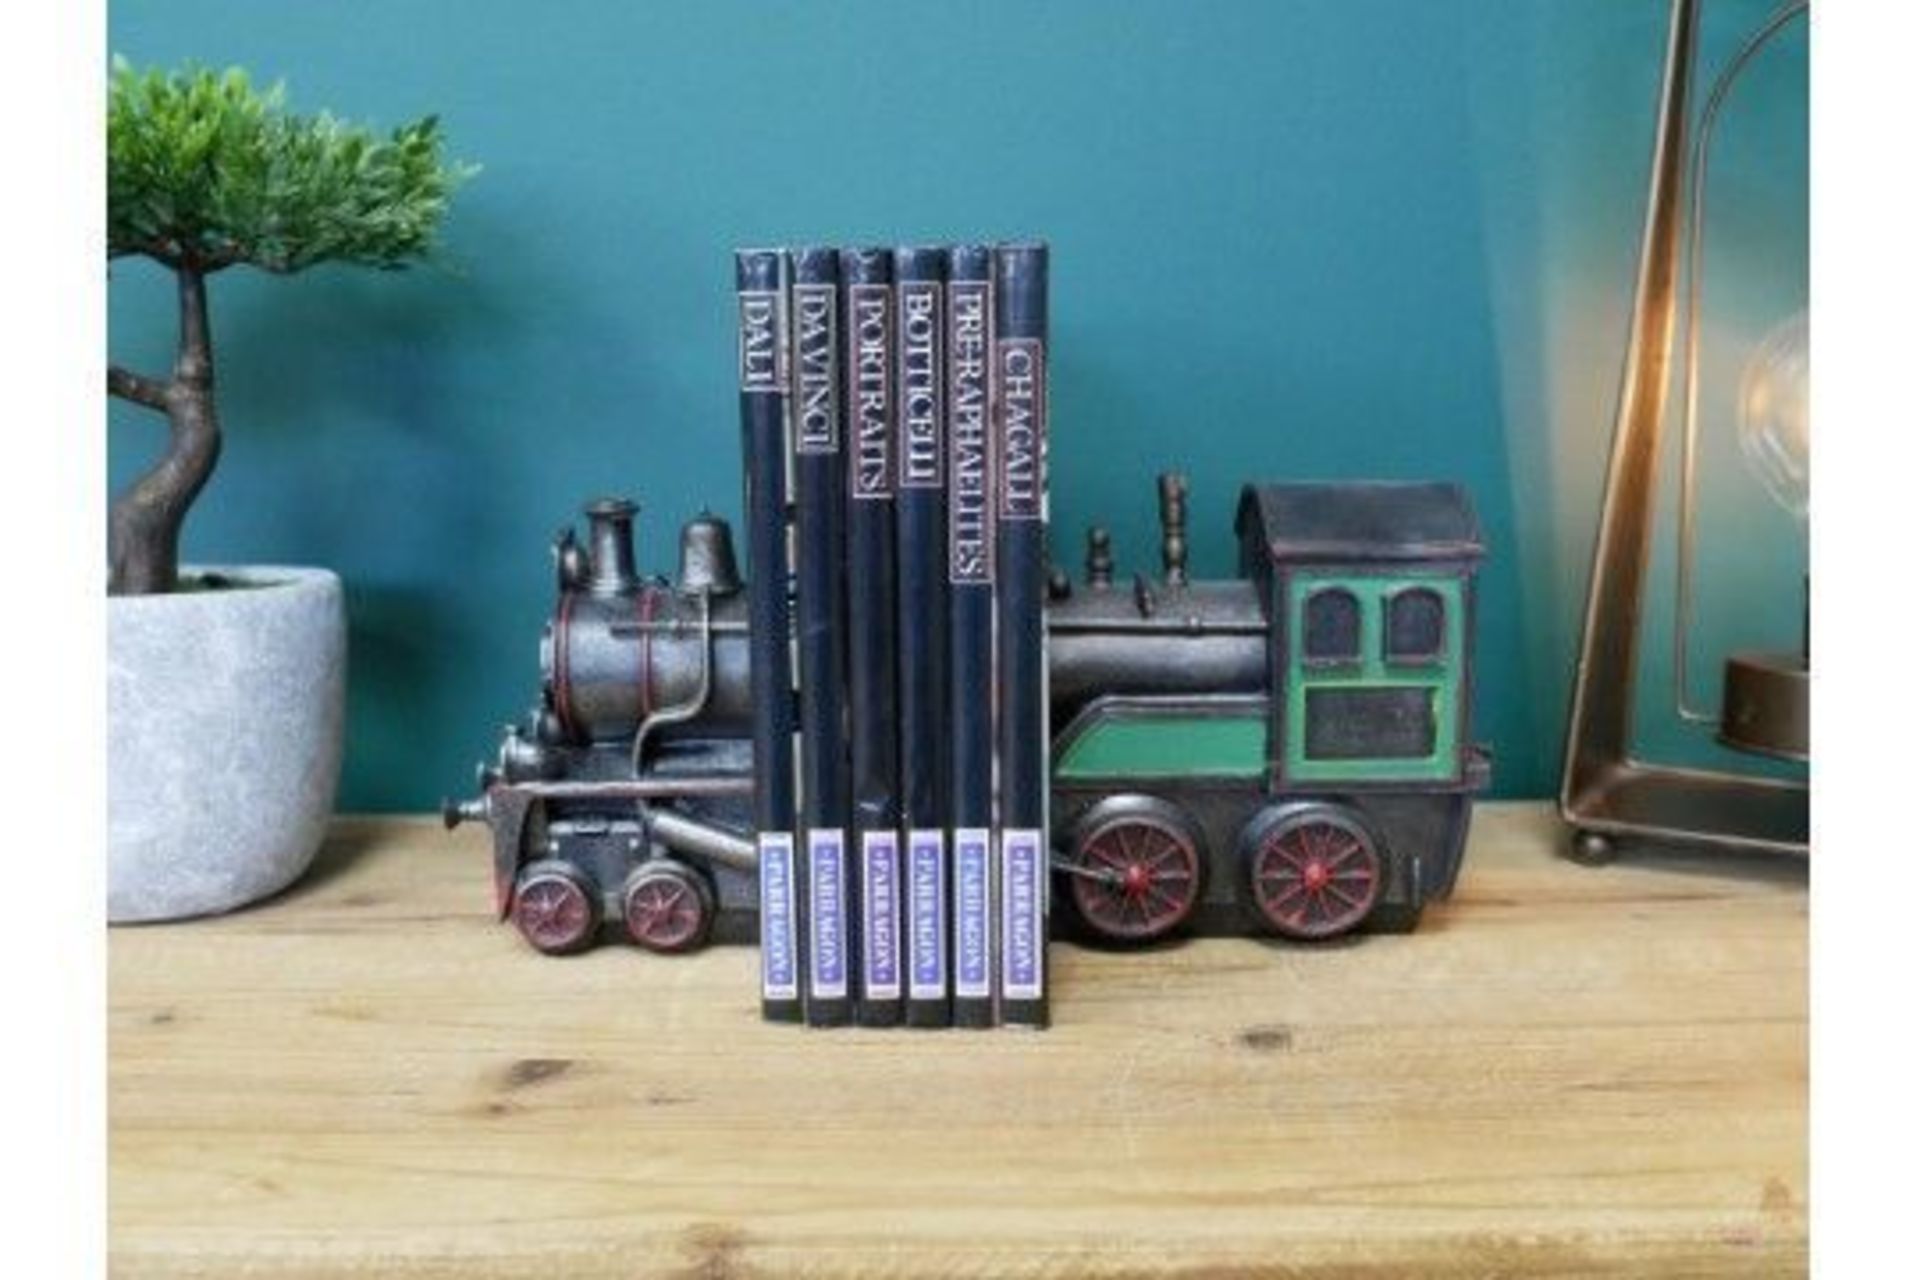 New Train Book Ends